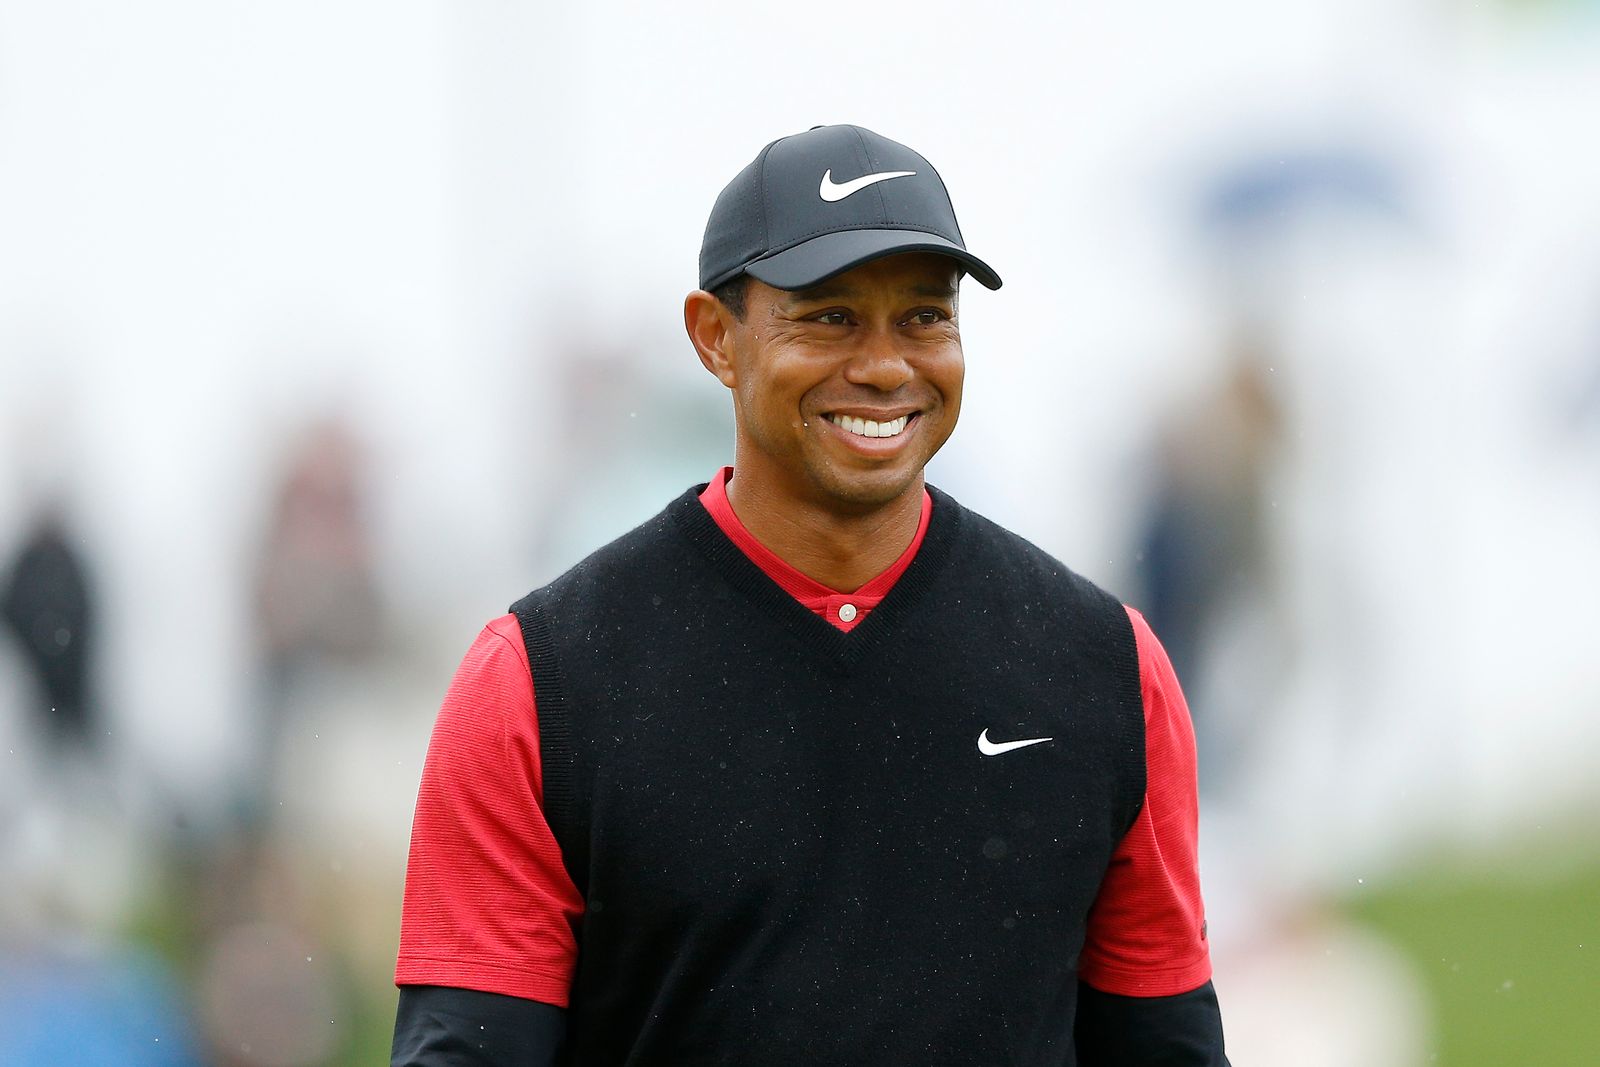 Tiger Woods' reaction after chipping in from the bunker on the third hole during the final round of The PLAYERS Championship at TPC Sawgrass on March 17, 2019. | Photo: Getty Images